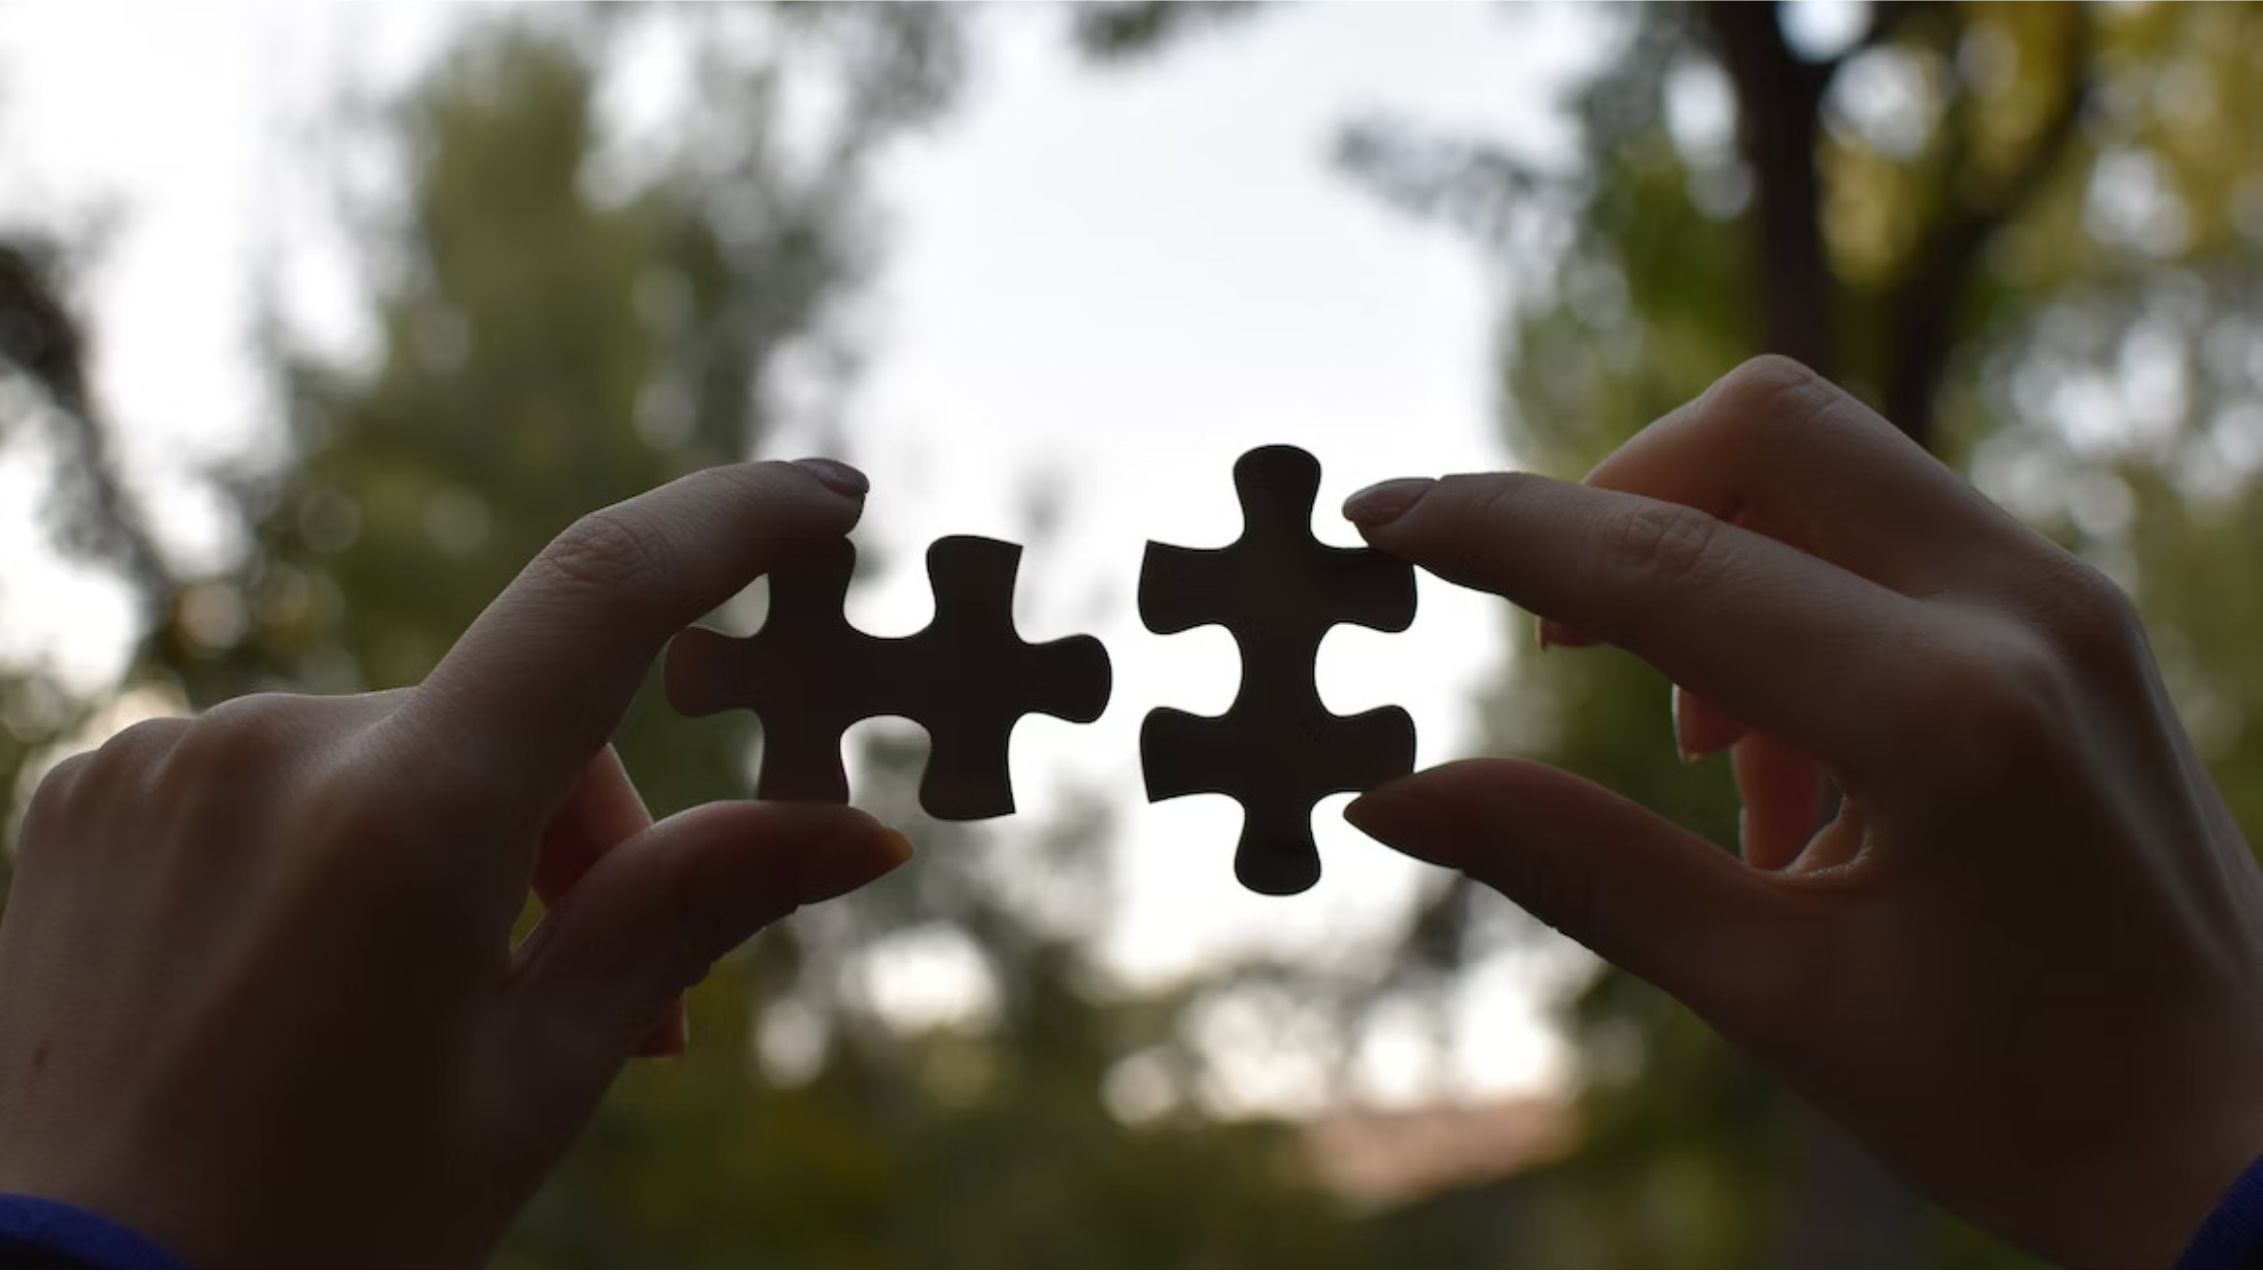 Hands holding 2 pieces of a puzzle, trees are in the background